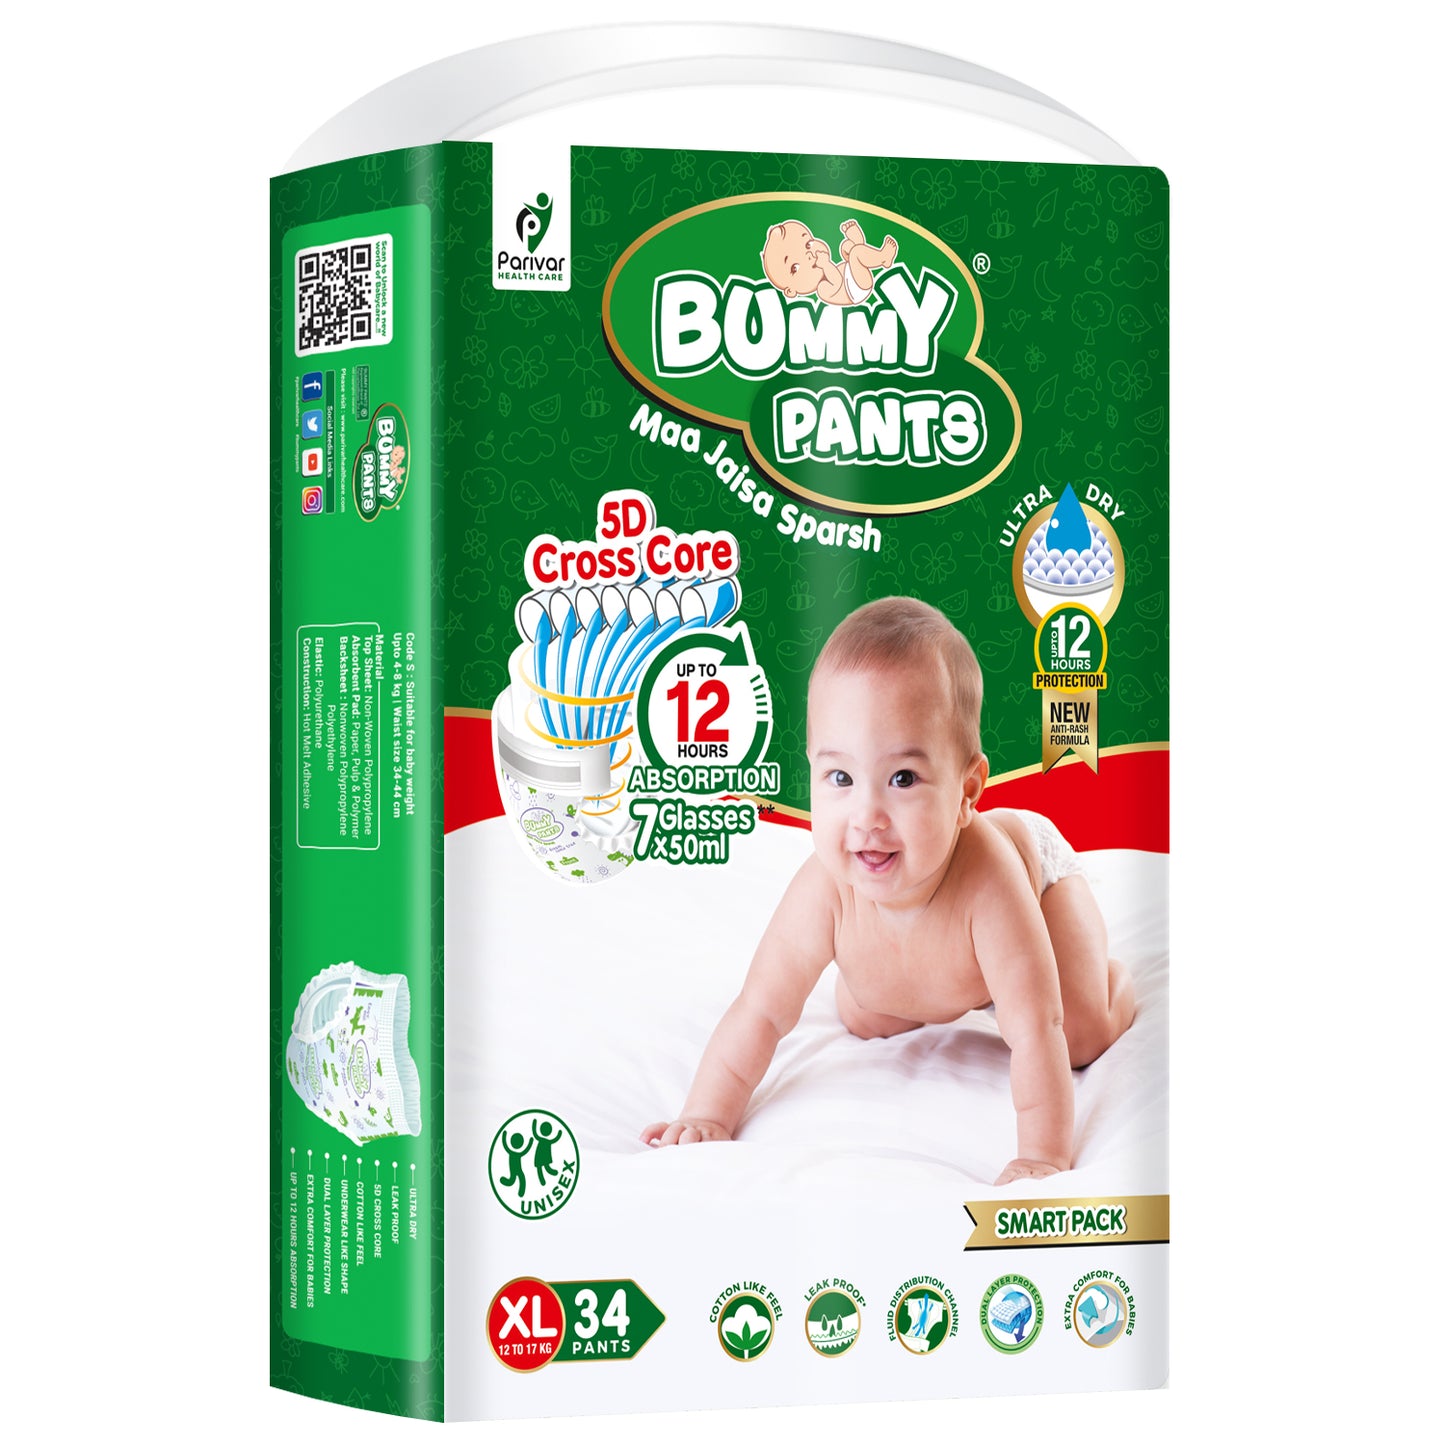 Baby Diaper in XL size, 34 Count, 5D Core, Anti-Rash Layer, 12-17kg